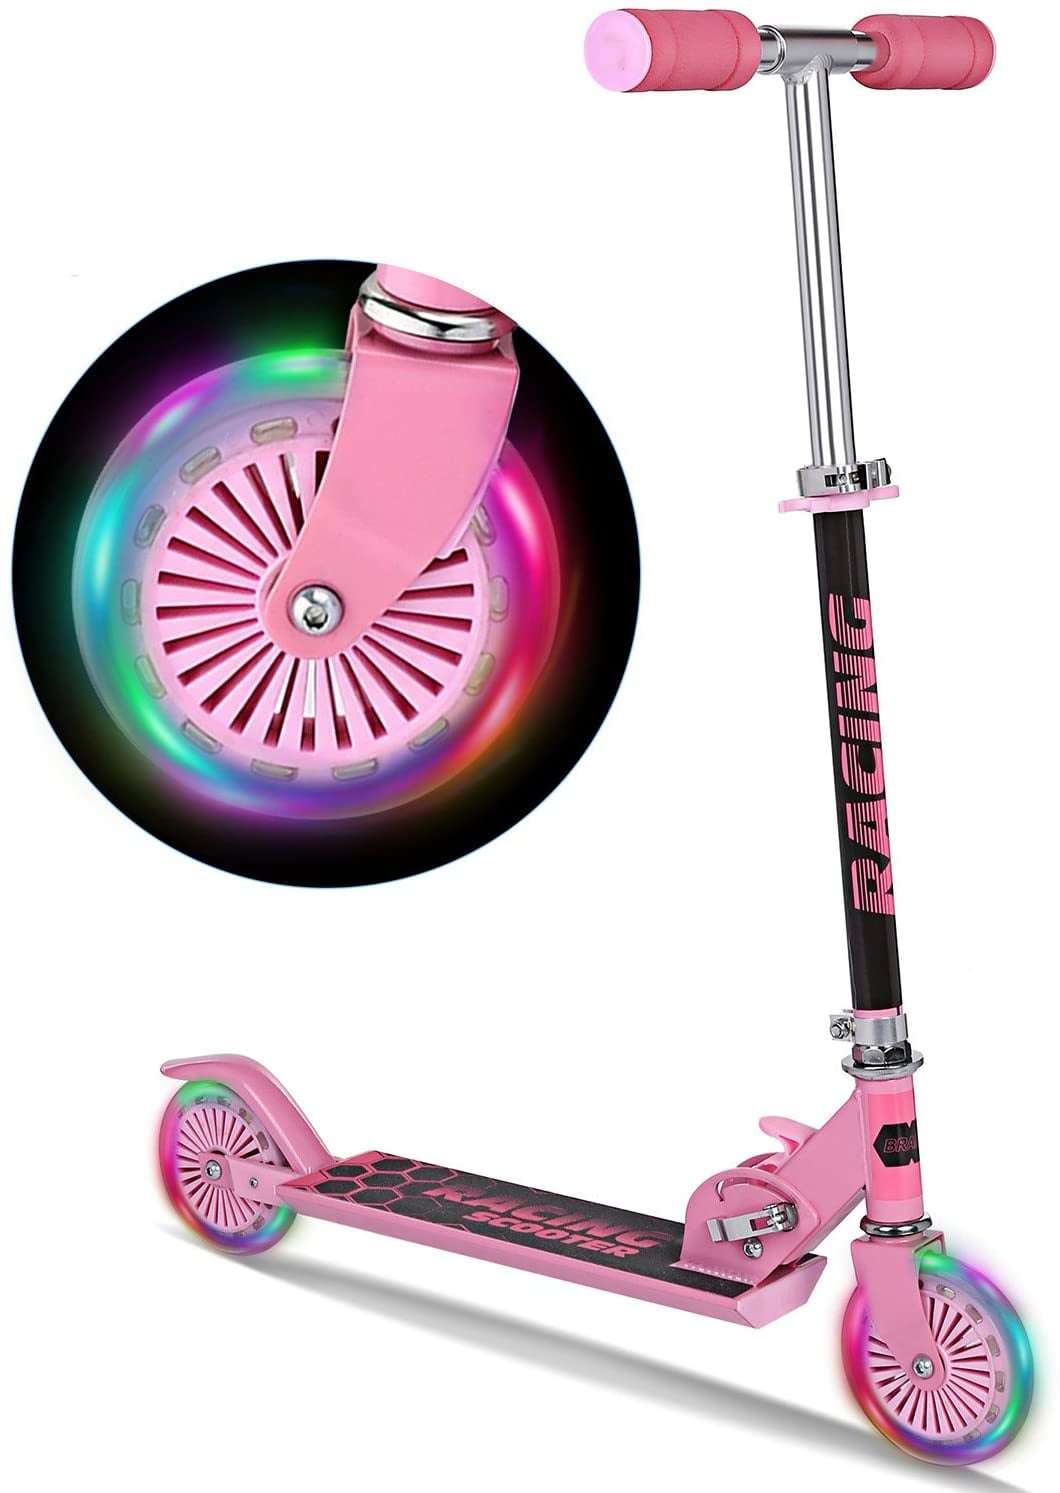 Details about   Kids Scooter Deluxe for Age 3-8 Adjustable Kick Scooters Girls Boys 2  B s h 82 